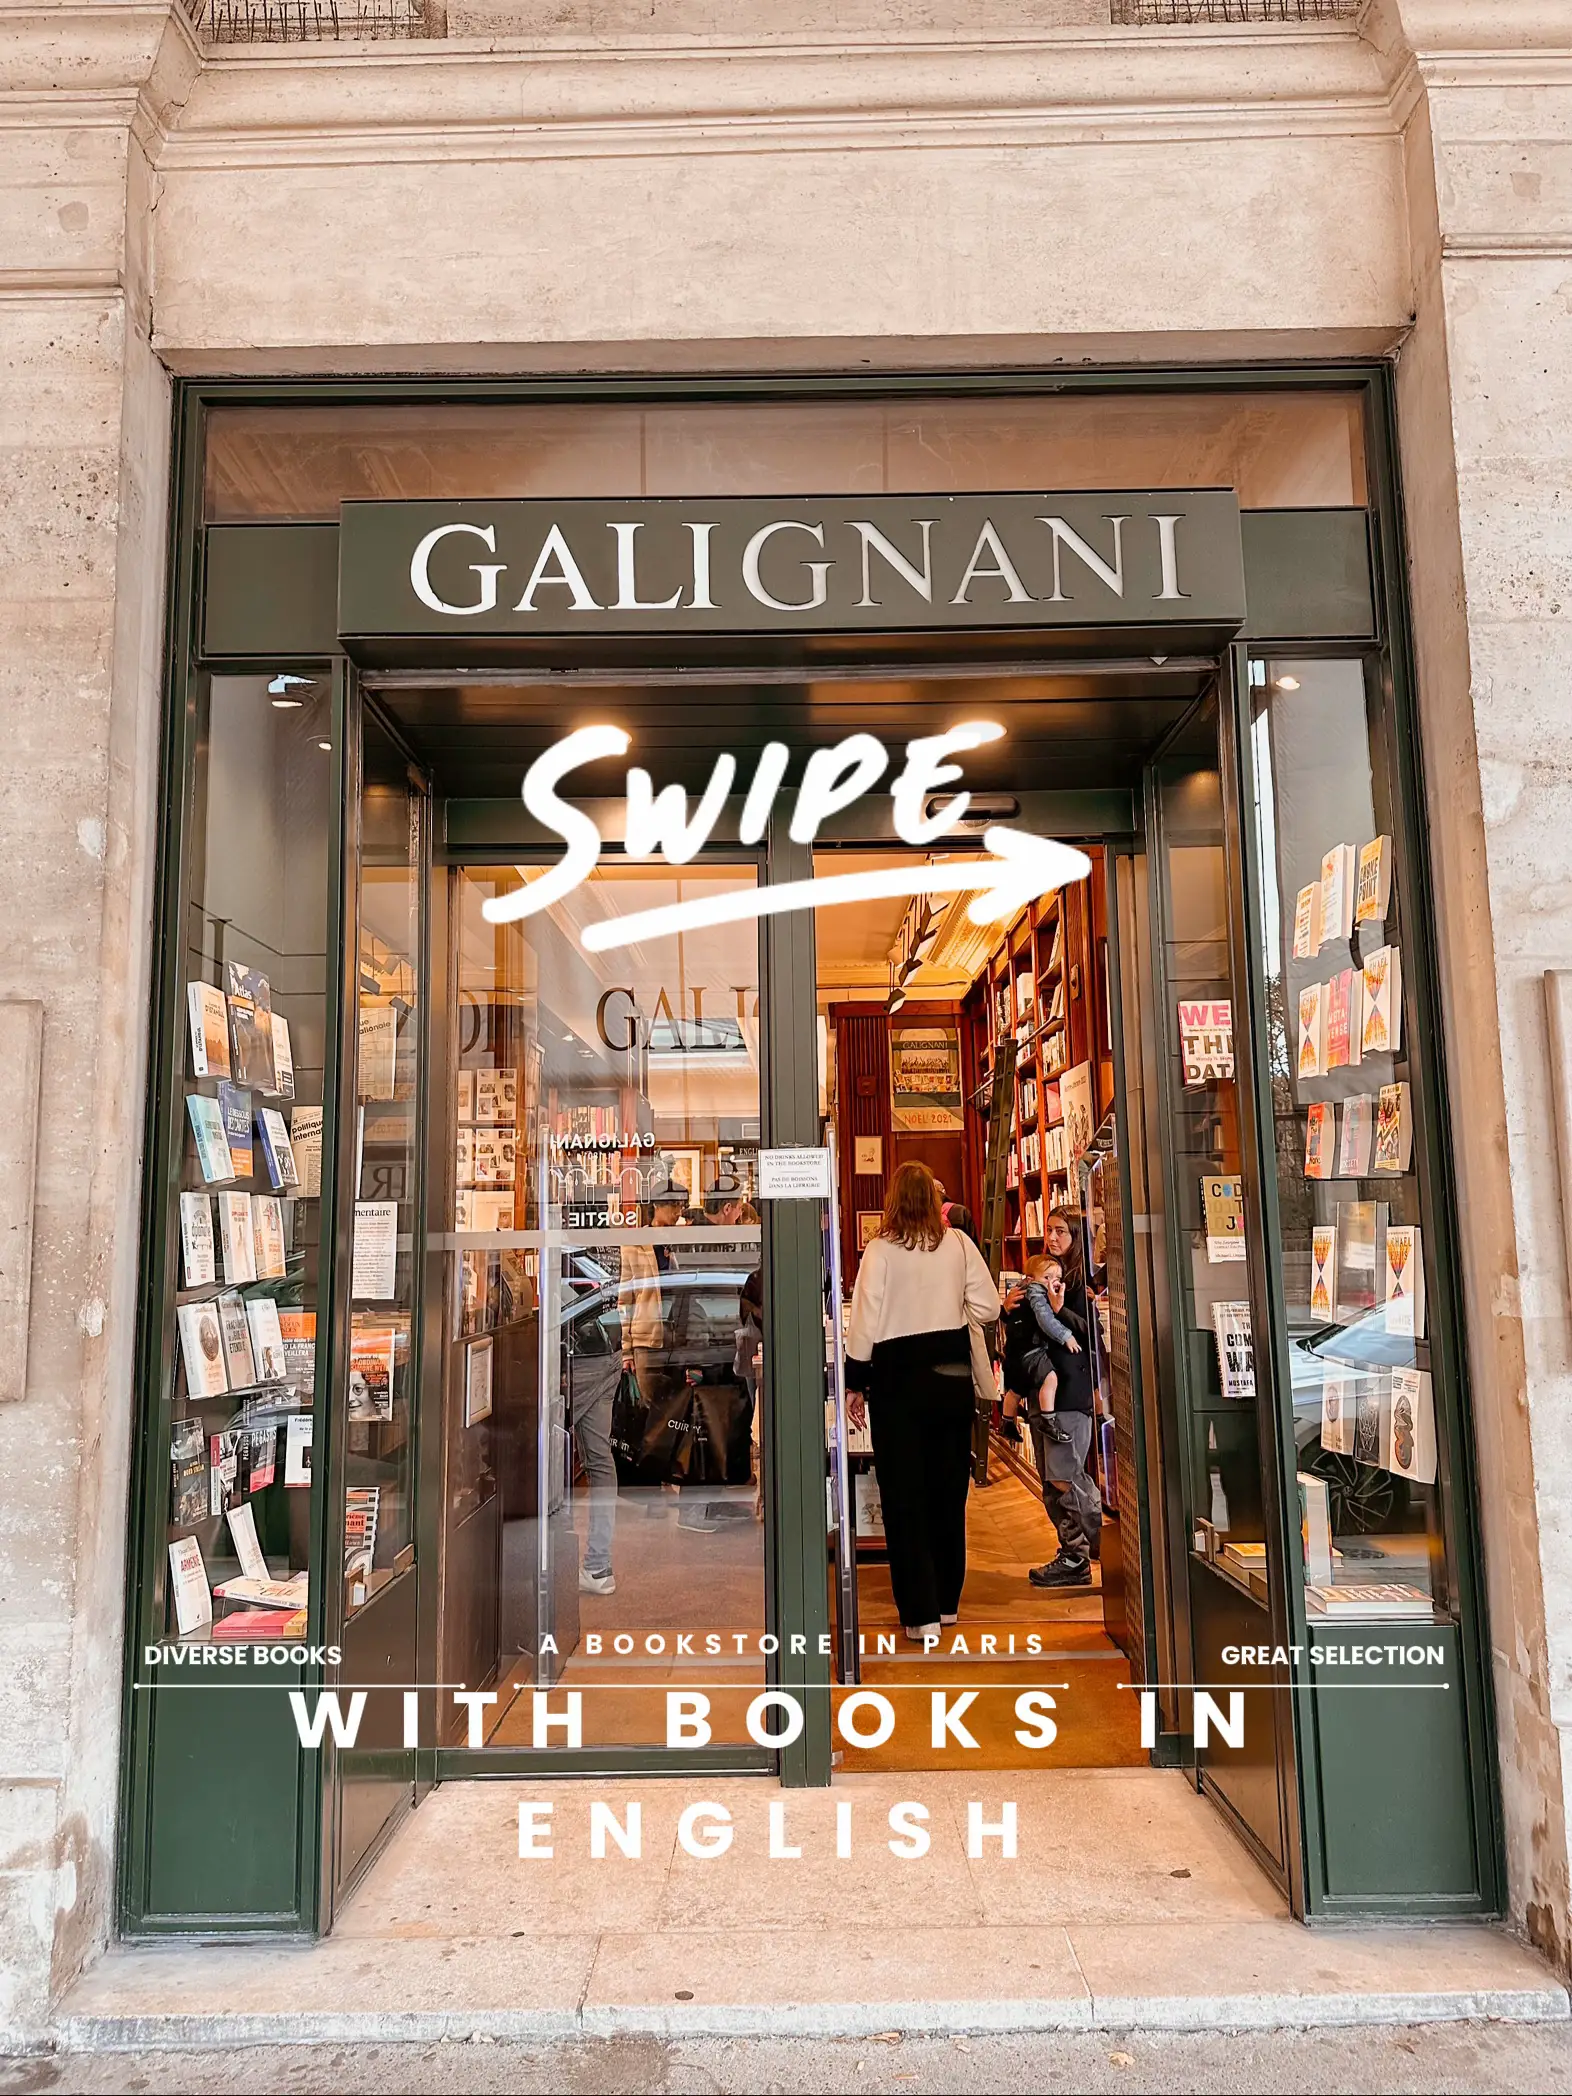 My Favourite Book Stores in Paris, by Catalina Rigou